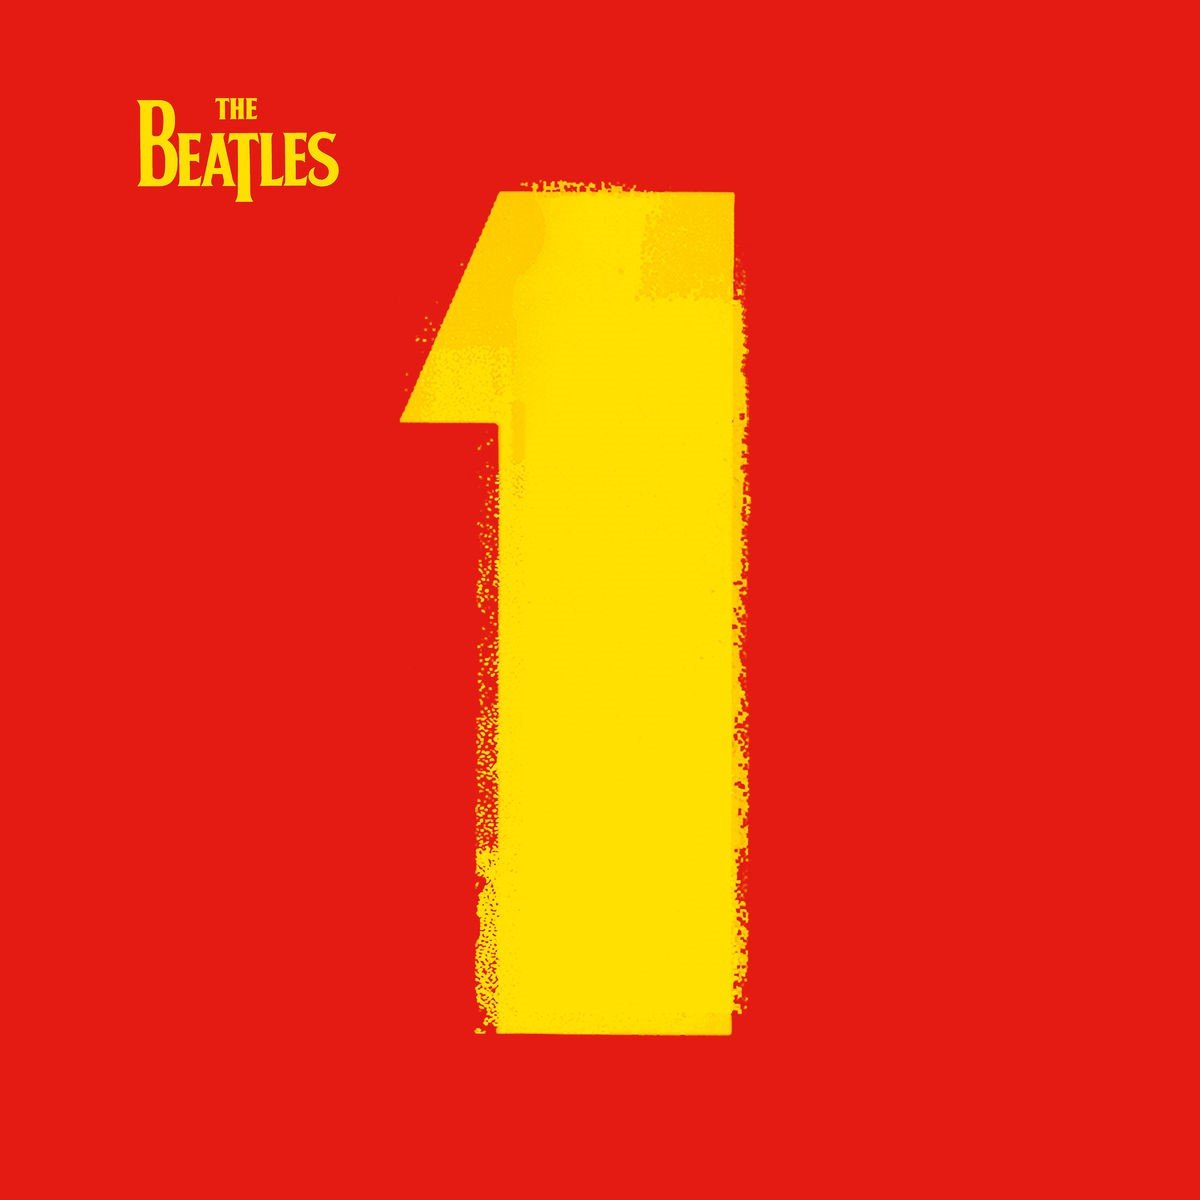 The Beatles - 1 (2 LP) (Limited Edition) - The Beatles